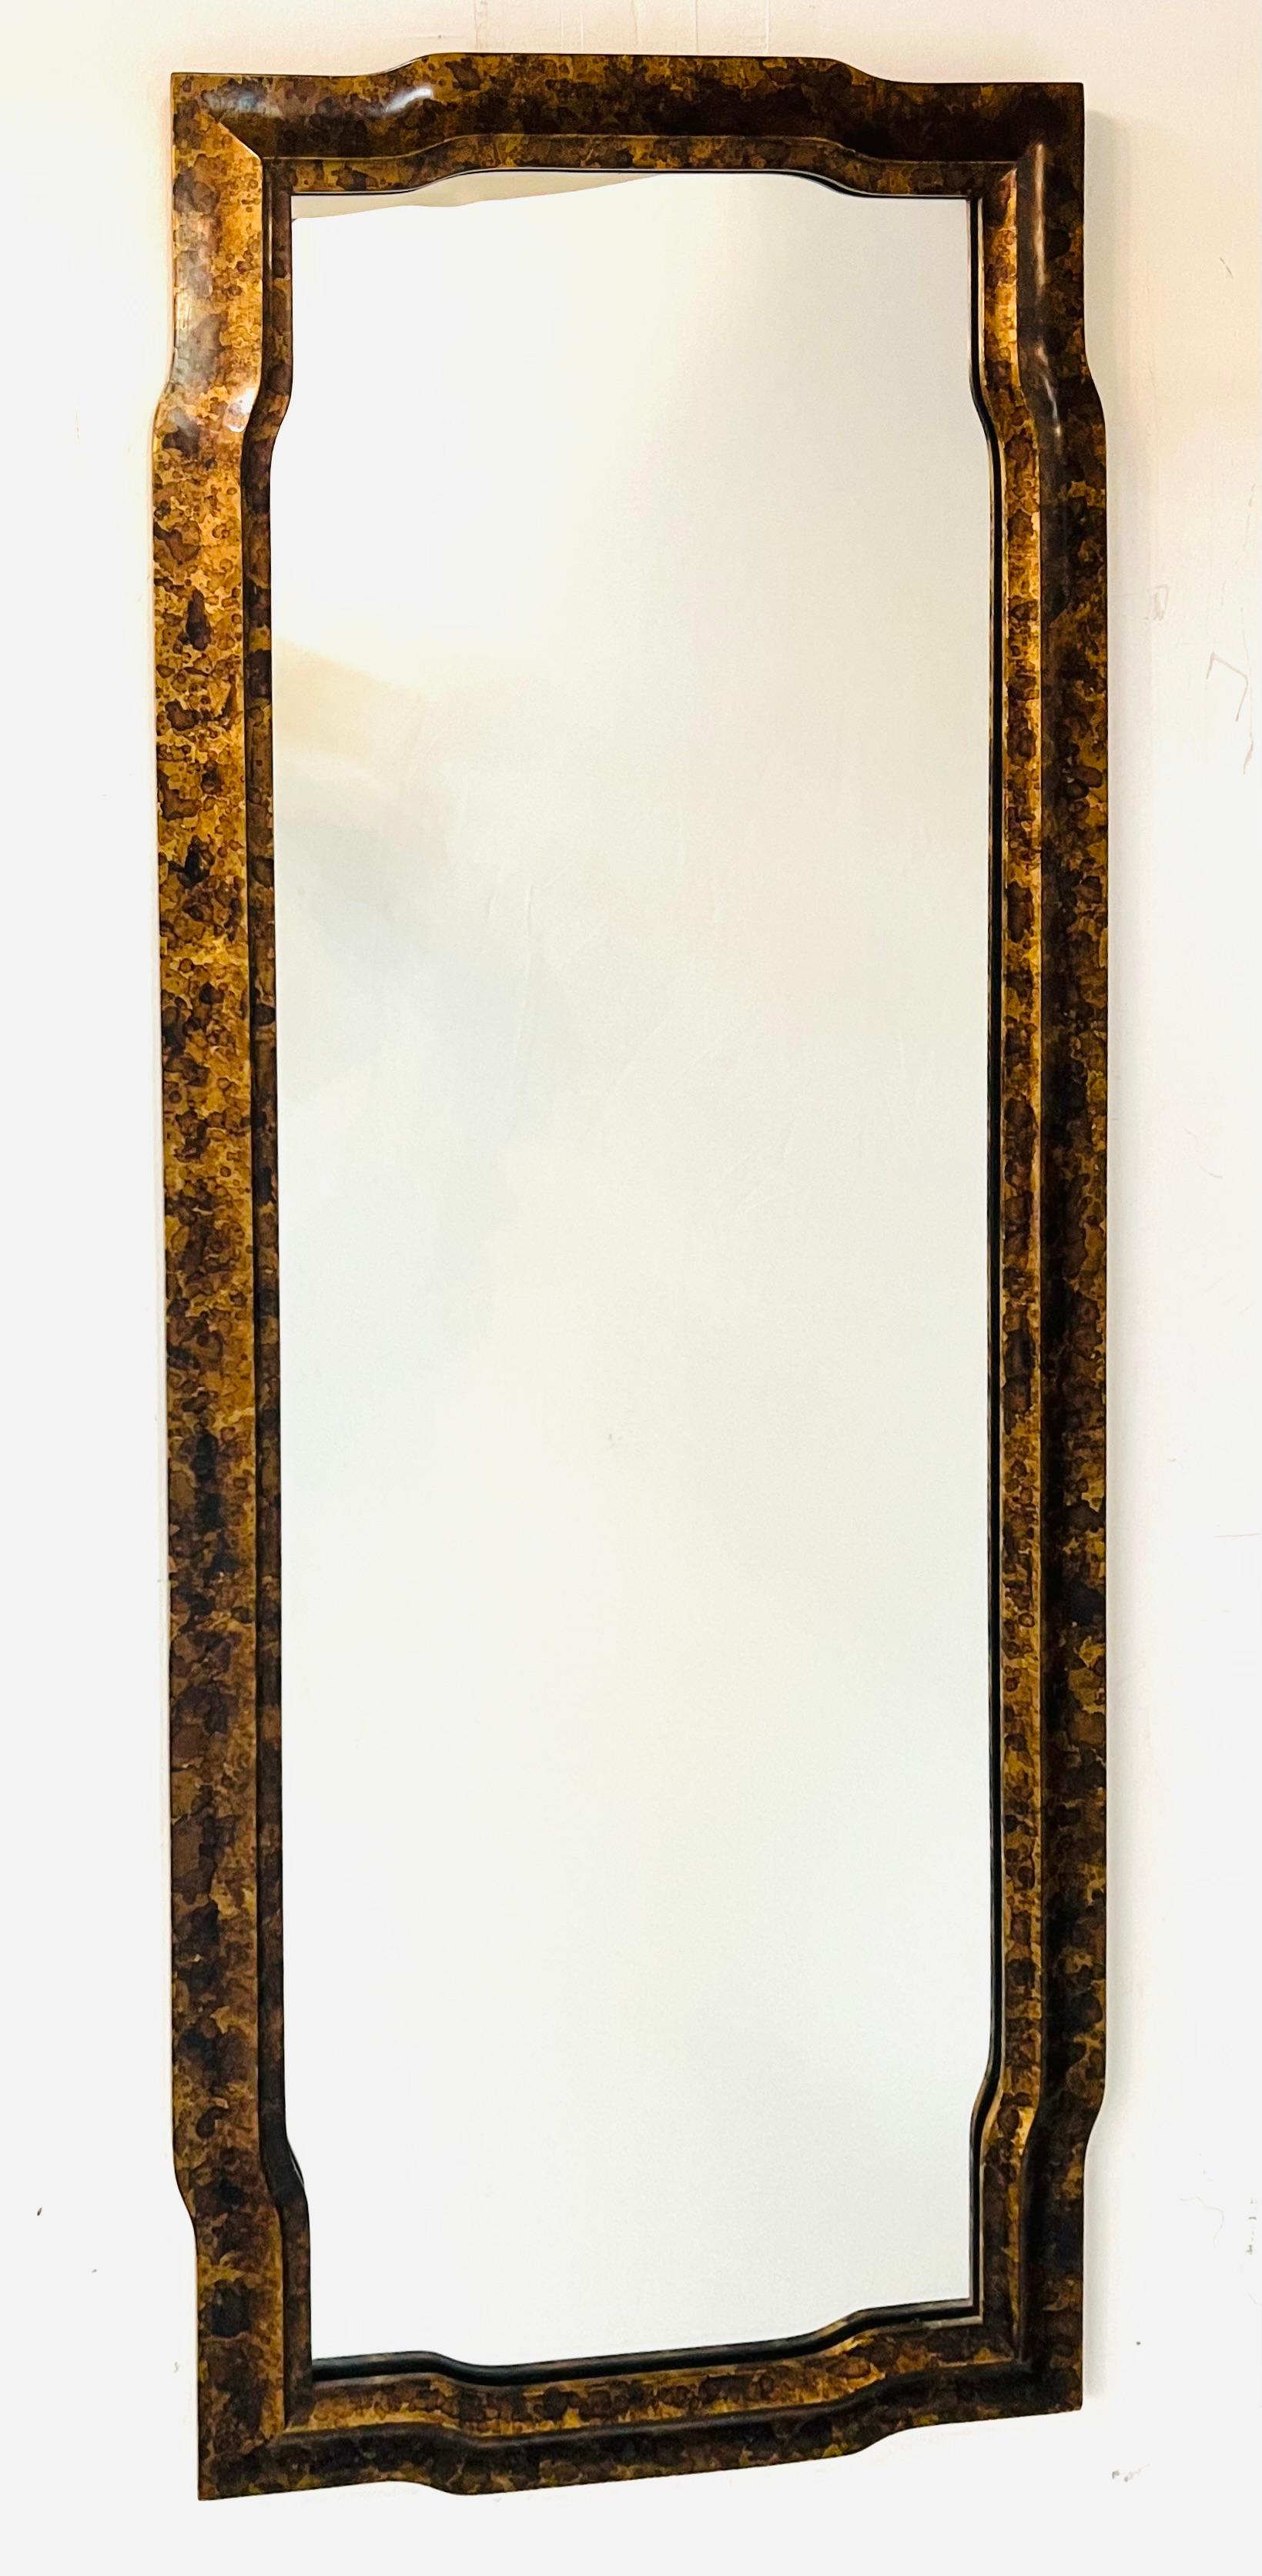 A Mid-Century Modern faux tortoise wall or console mirror designed by John Widdicomb for and manufactured by John Stuart. The beautiful mirror features fine curvy design and the faux tortoise in light and dark brown surface patten is gorgeous. The